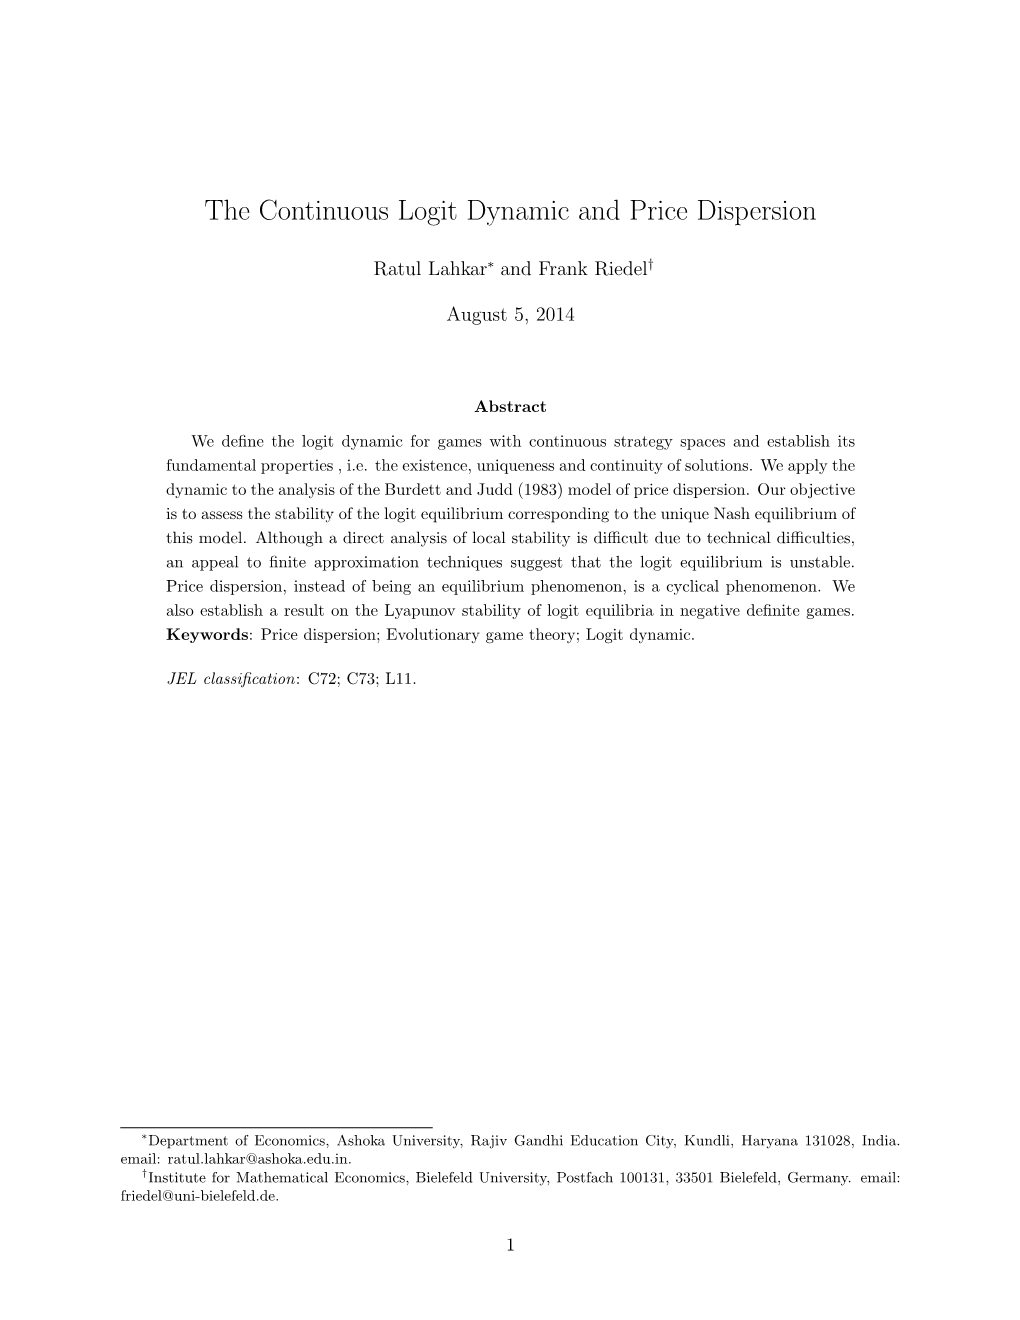 The Continuous Logit Dynamic and Price Dispersion